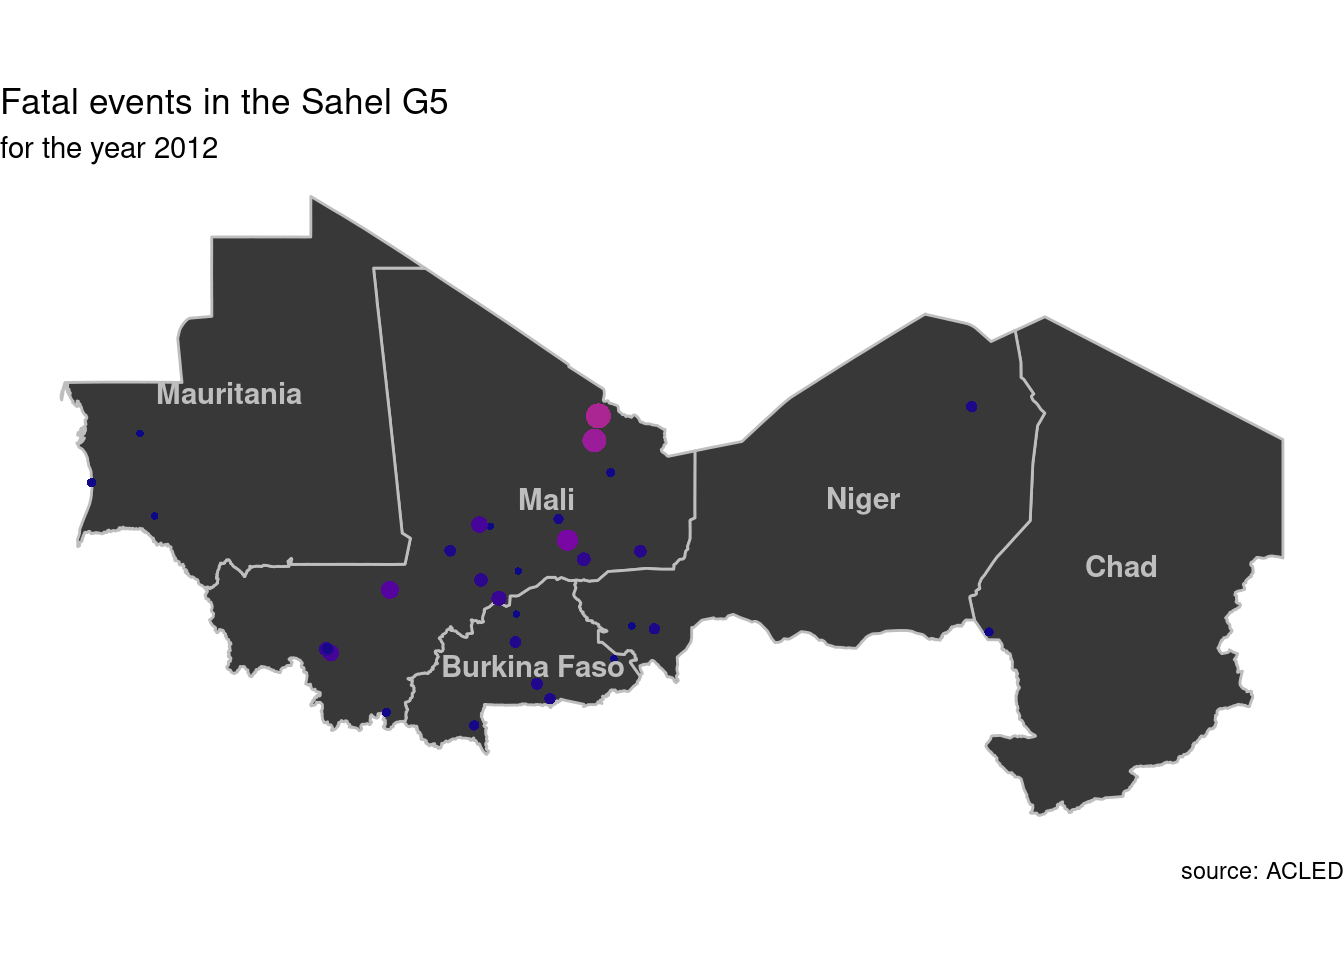 A map of sahel countries with the number of violent events animated between 2012 and 2018.